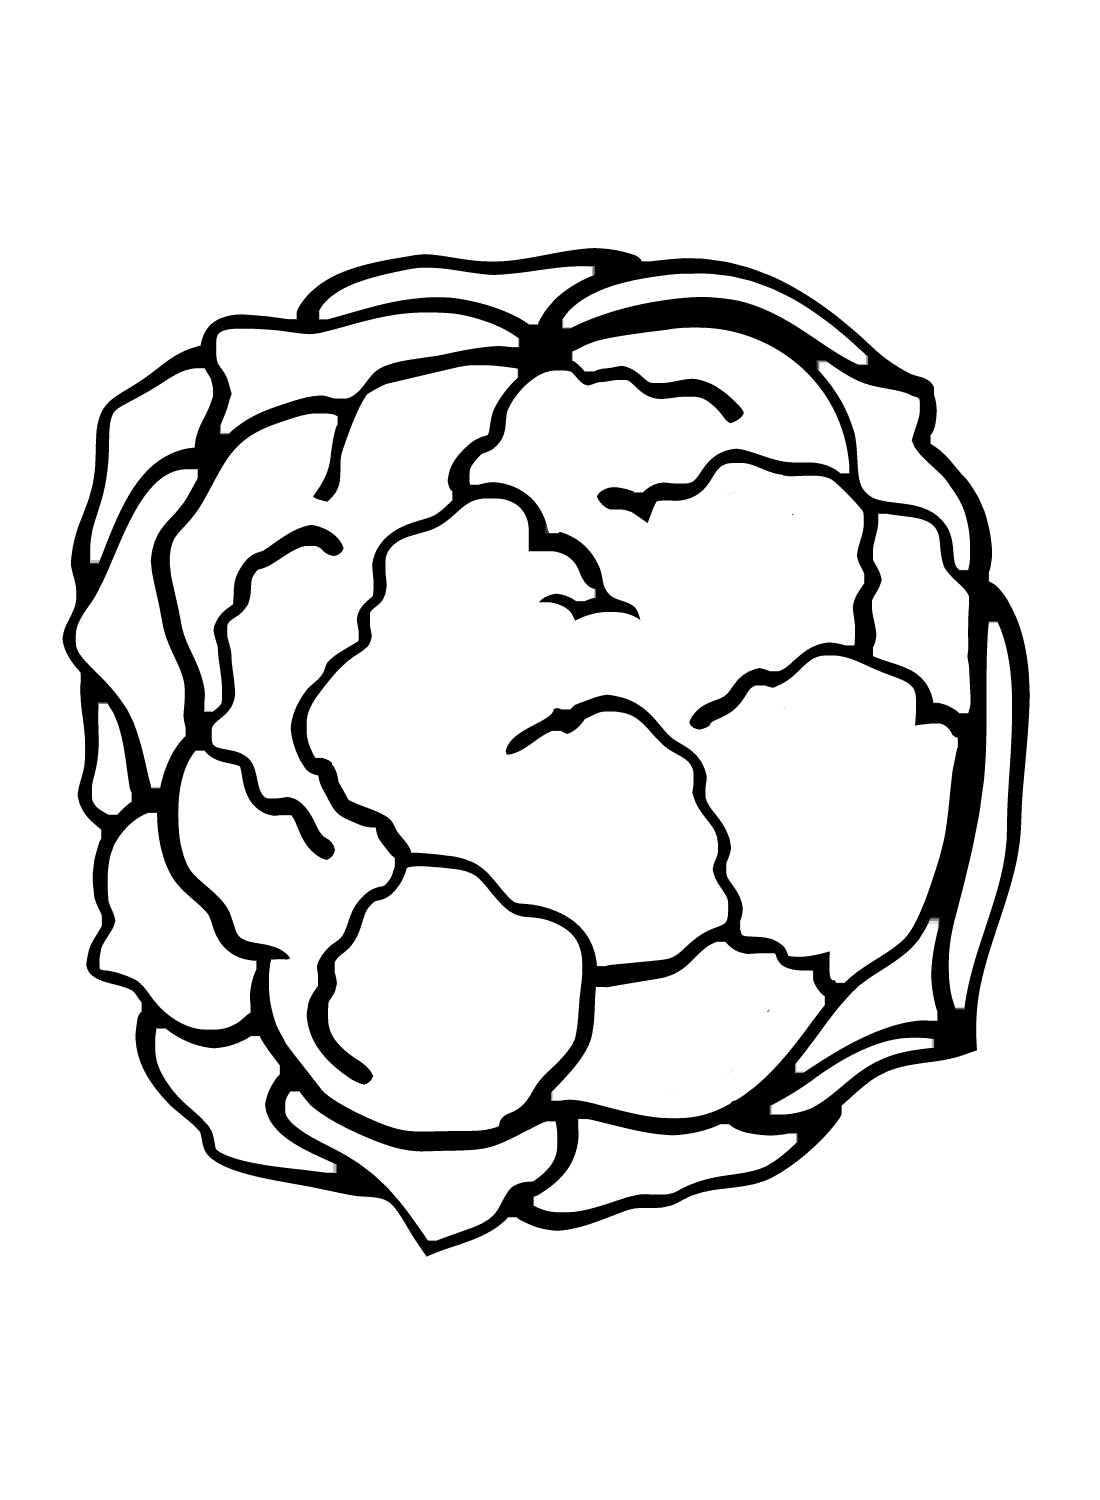 Cauliflower color Sheets Coloring Pages